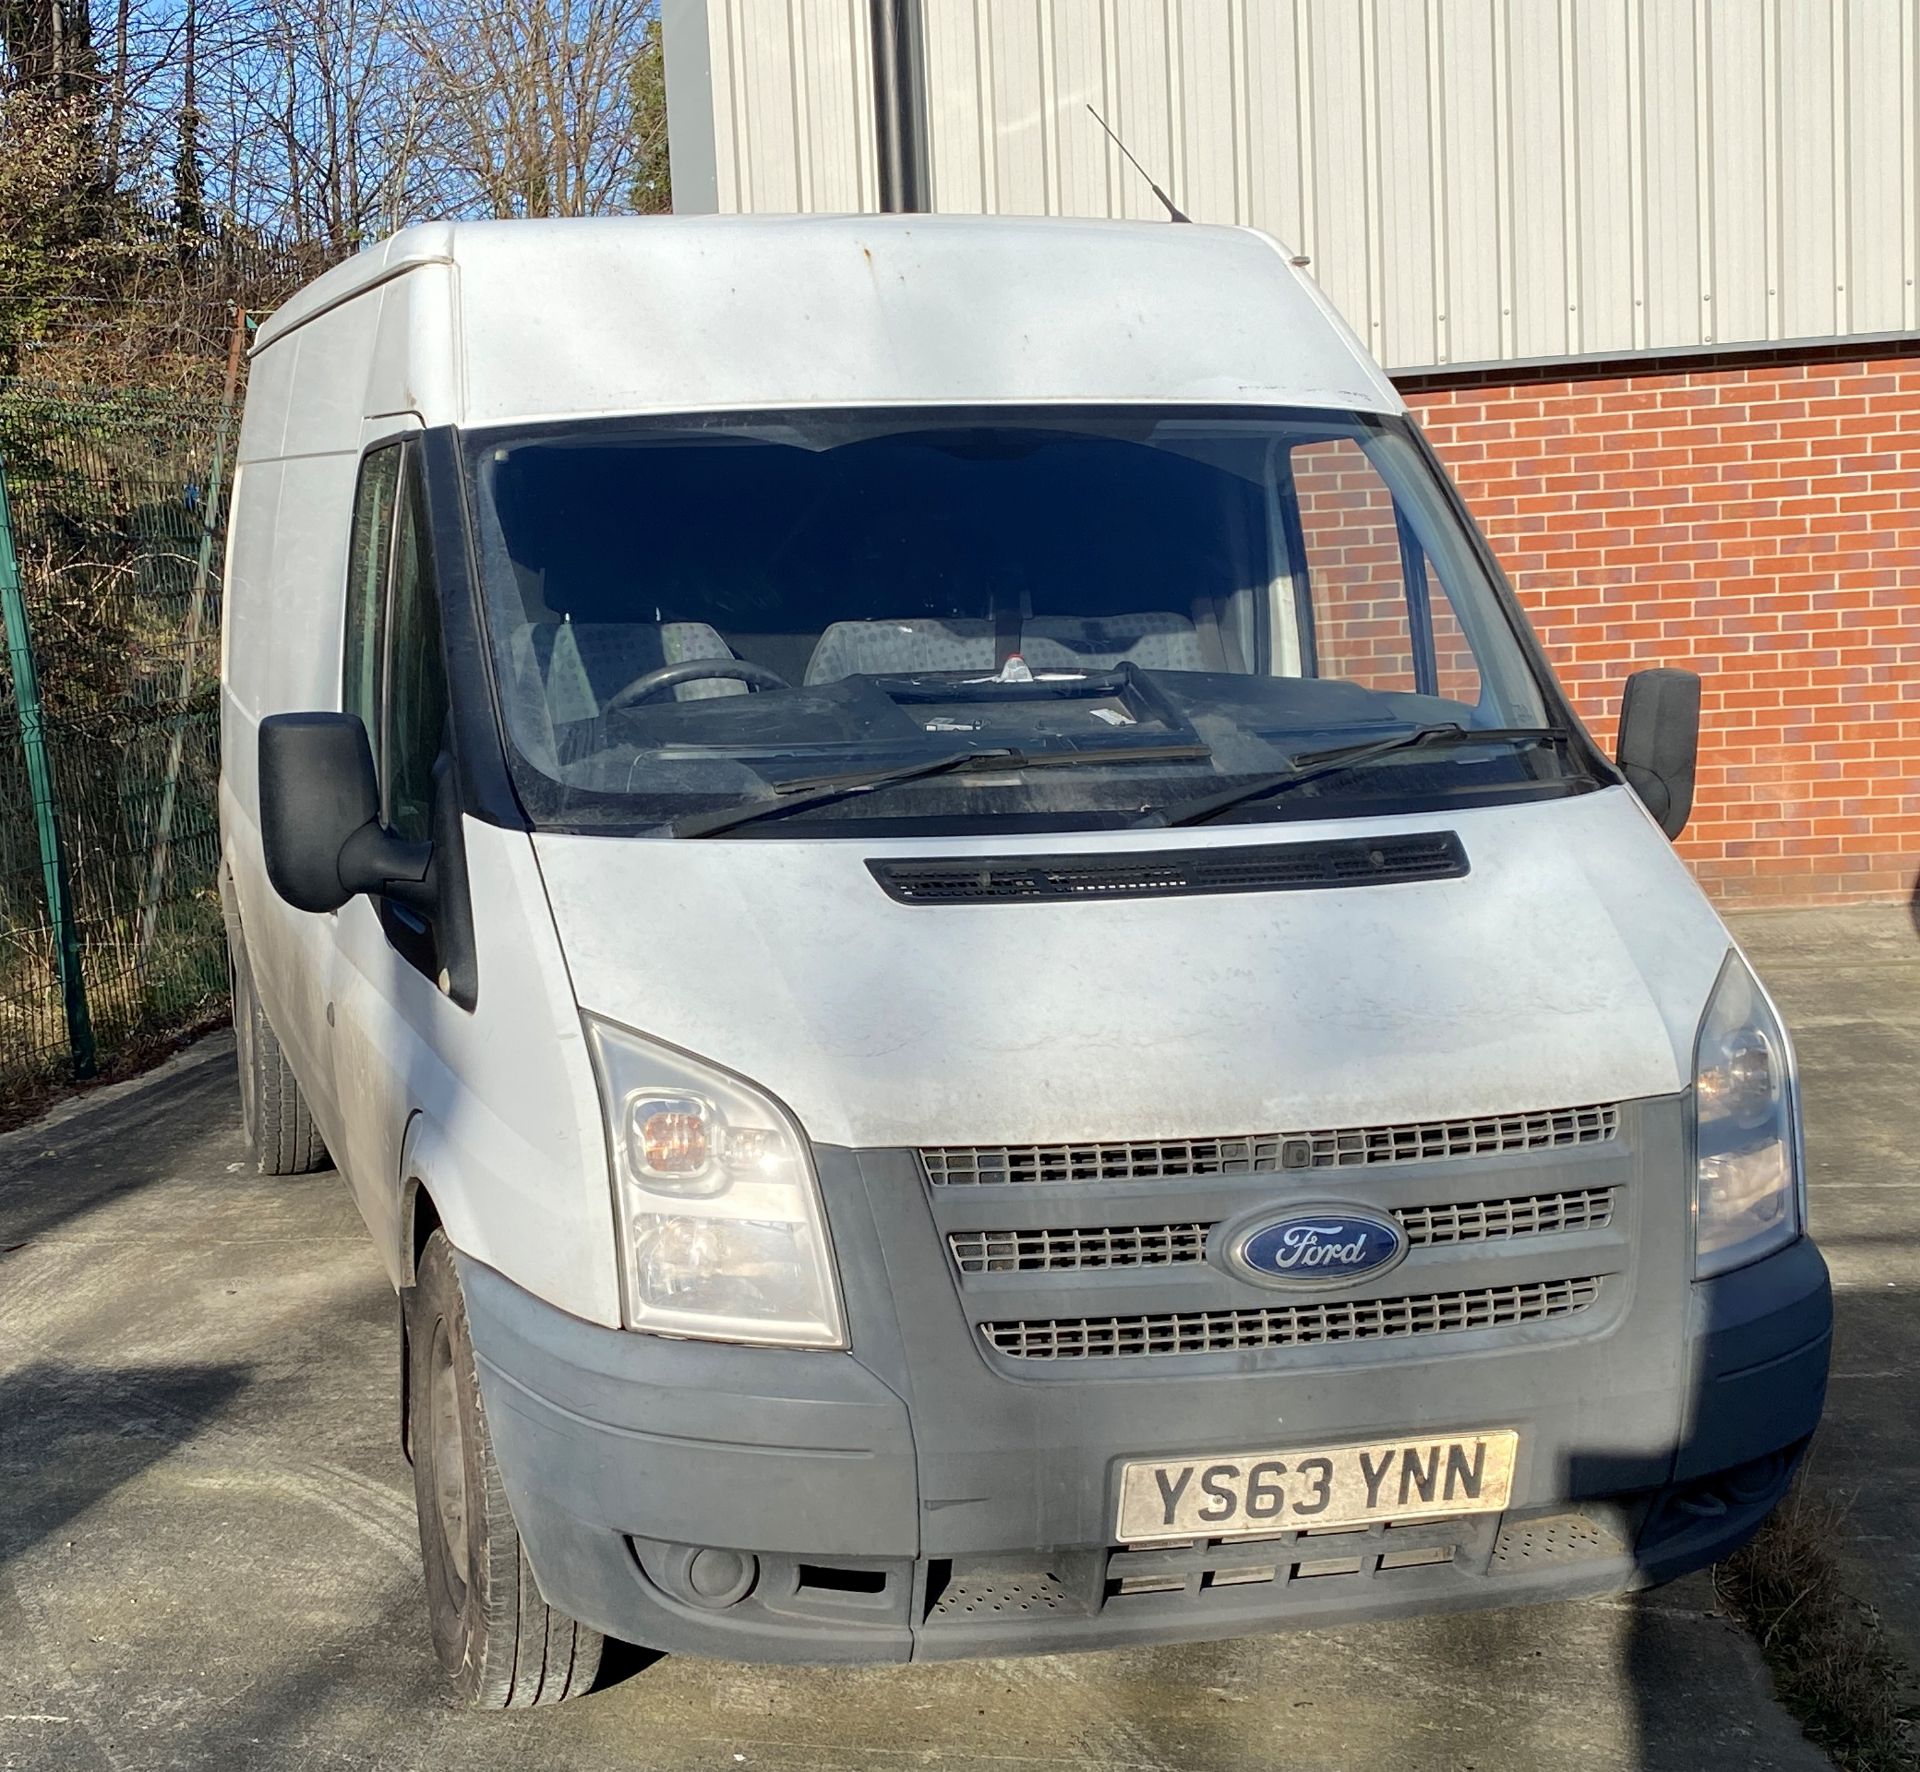 FORD TRANSIT T280 DURATORQ PANEL VAN (listed on HPI as a 125 T350 FWD) - Diesel - White. - Image 5 of 19